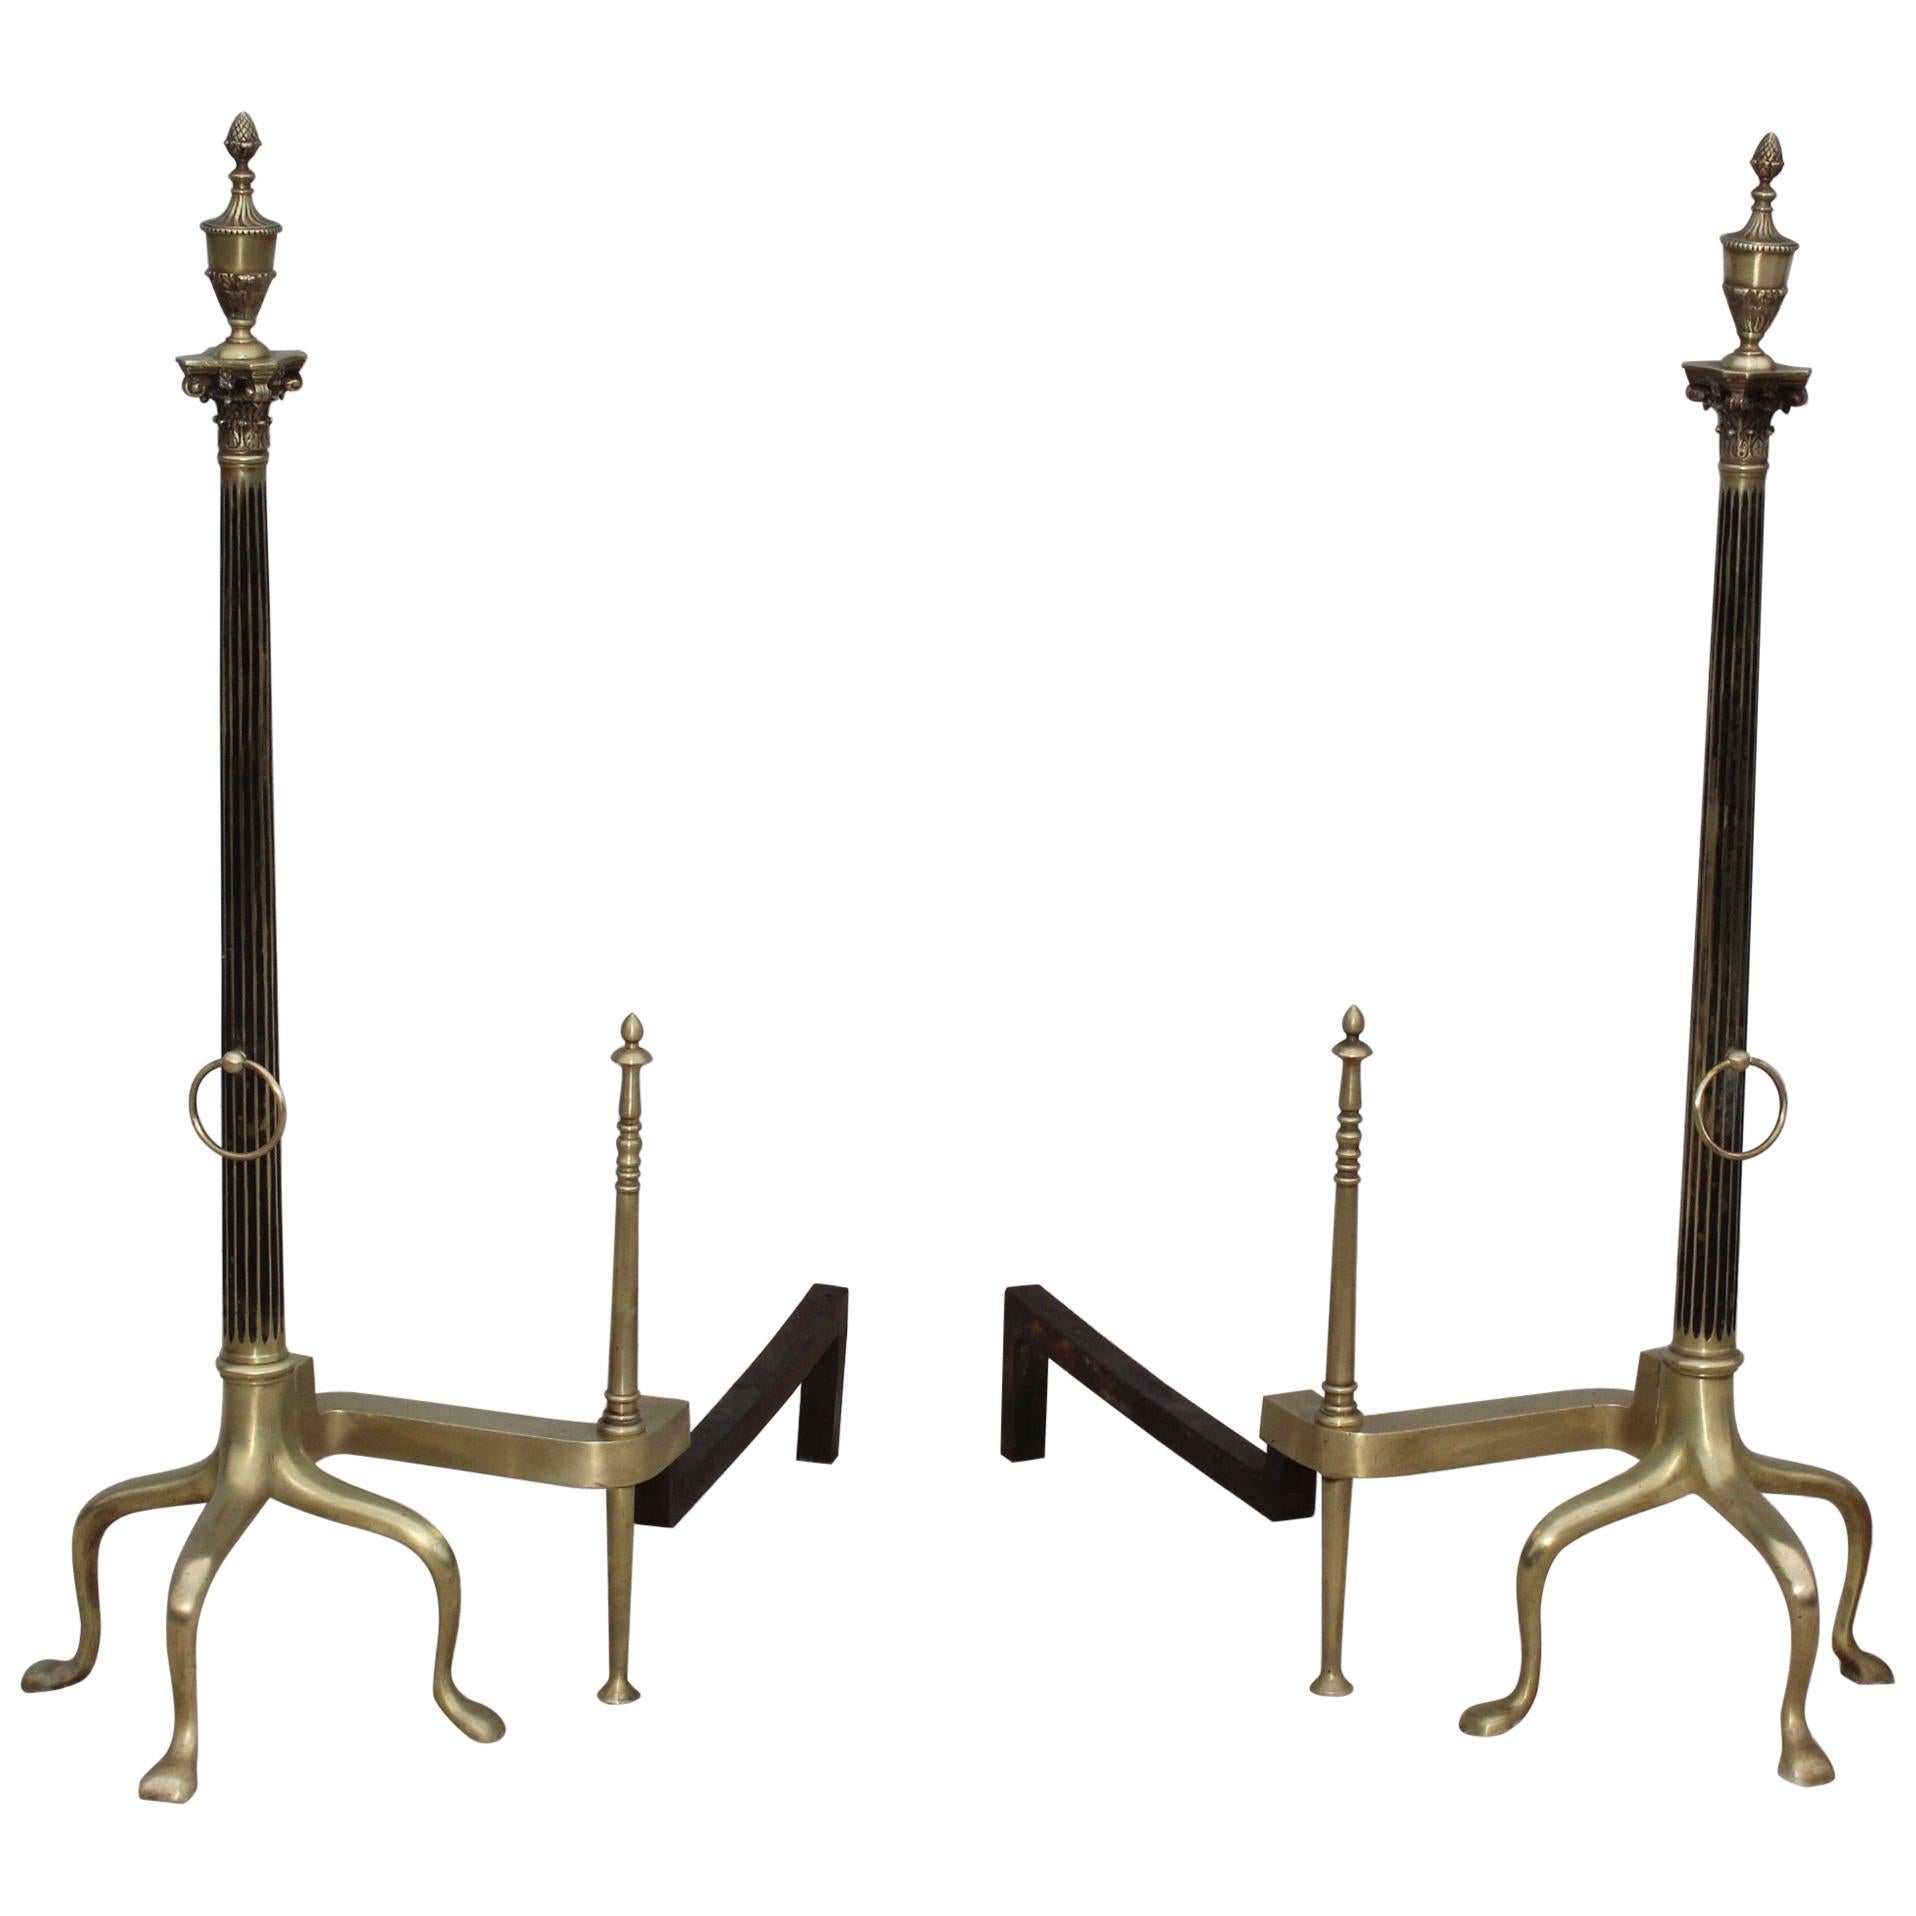 1960's Large Mid-Century Modern French Brass Andirons